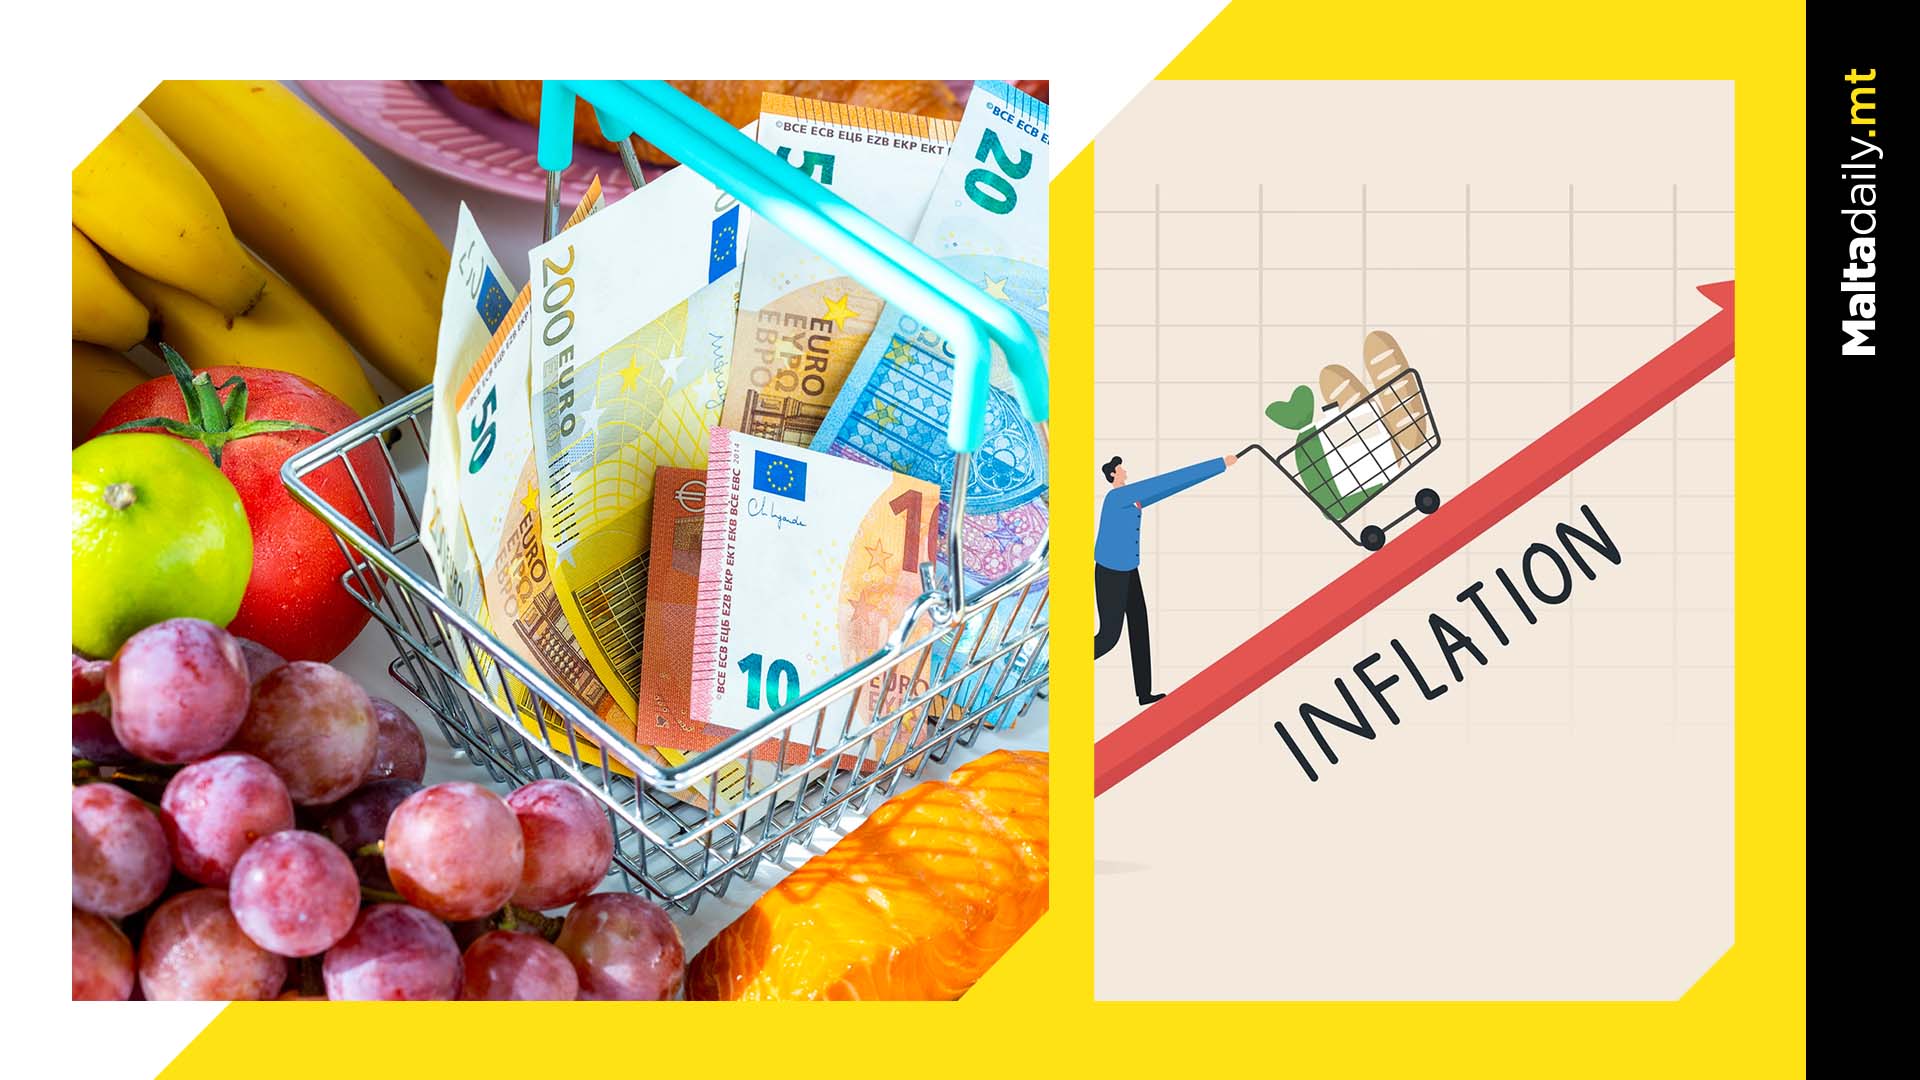 Food and drink prices skyrocket in March 2023 due to inflation